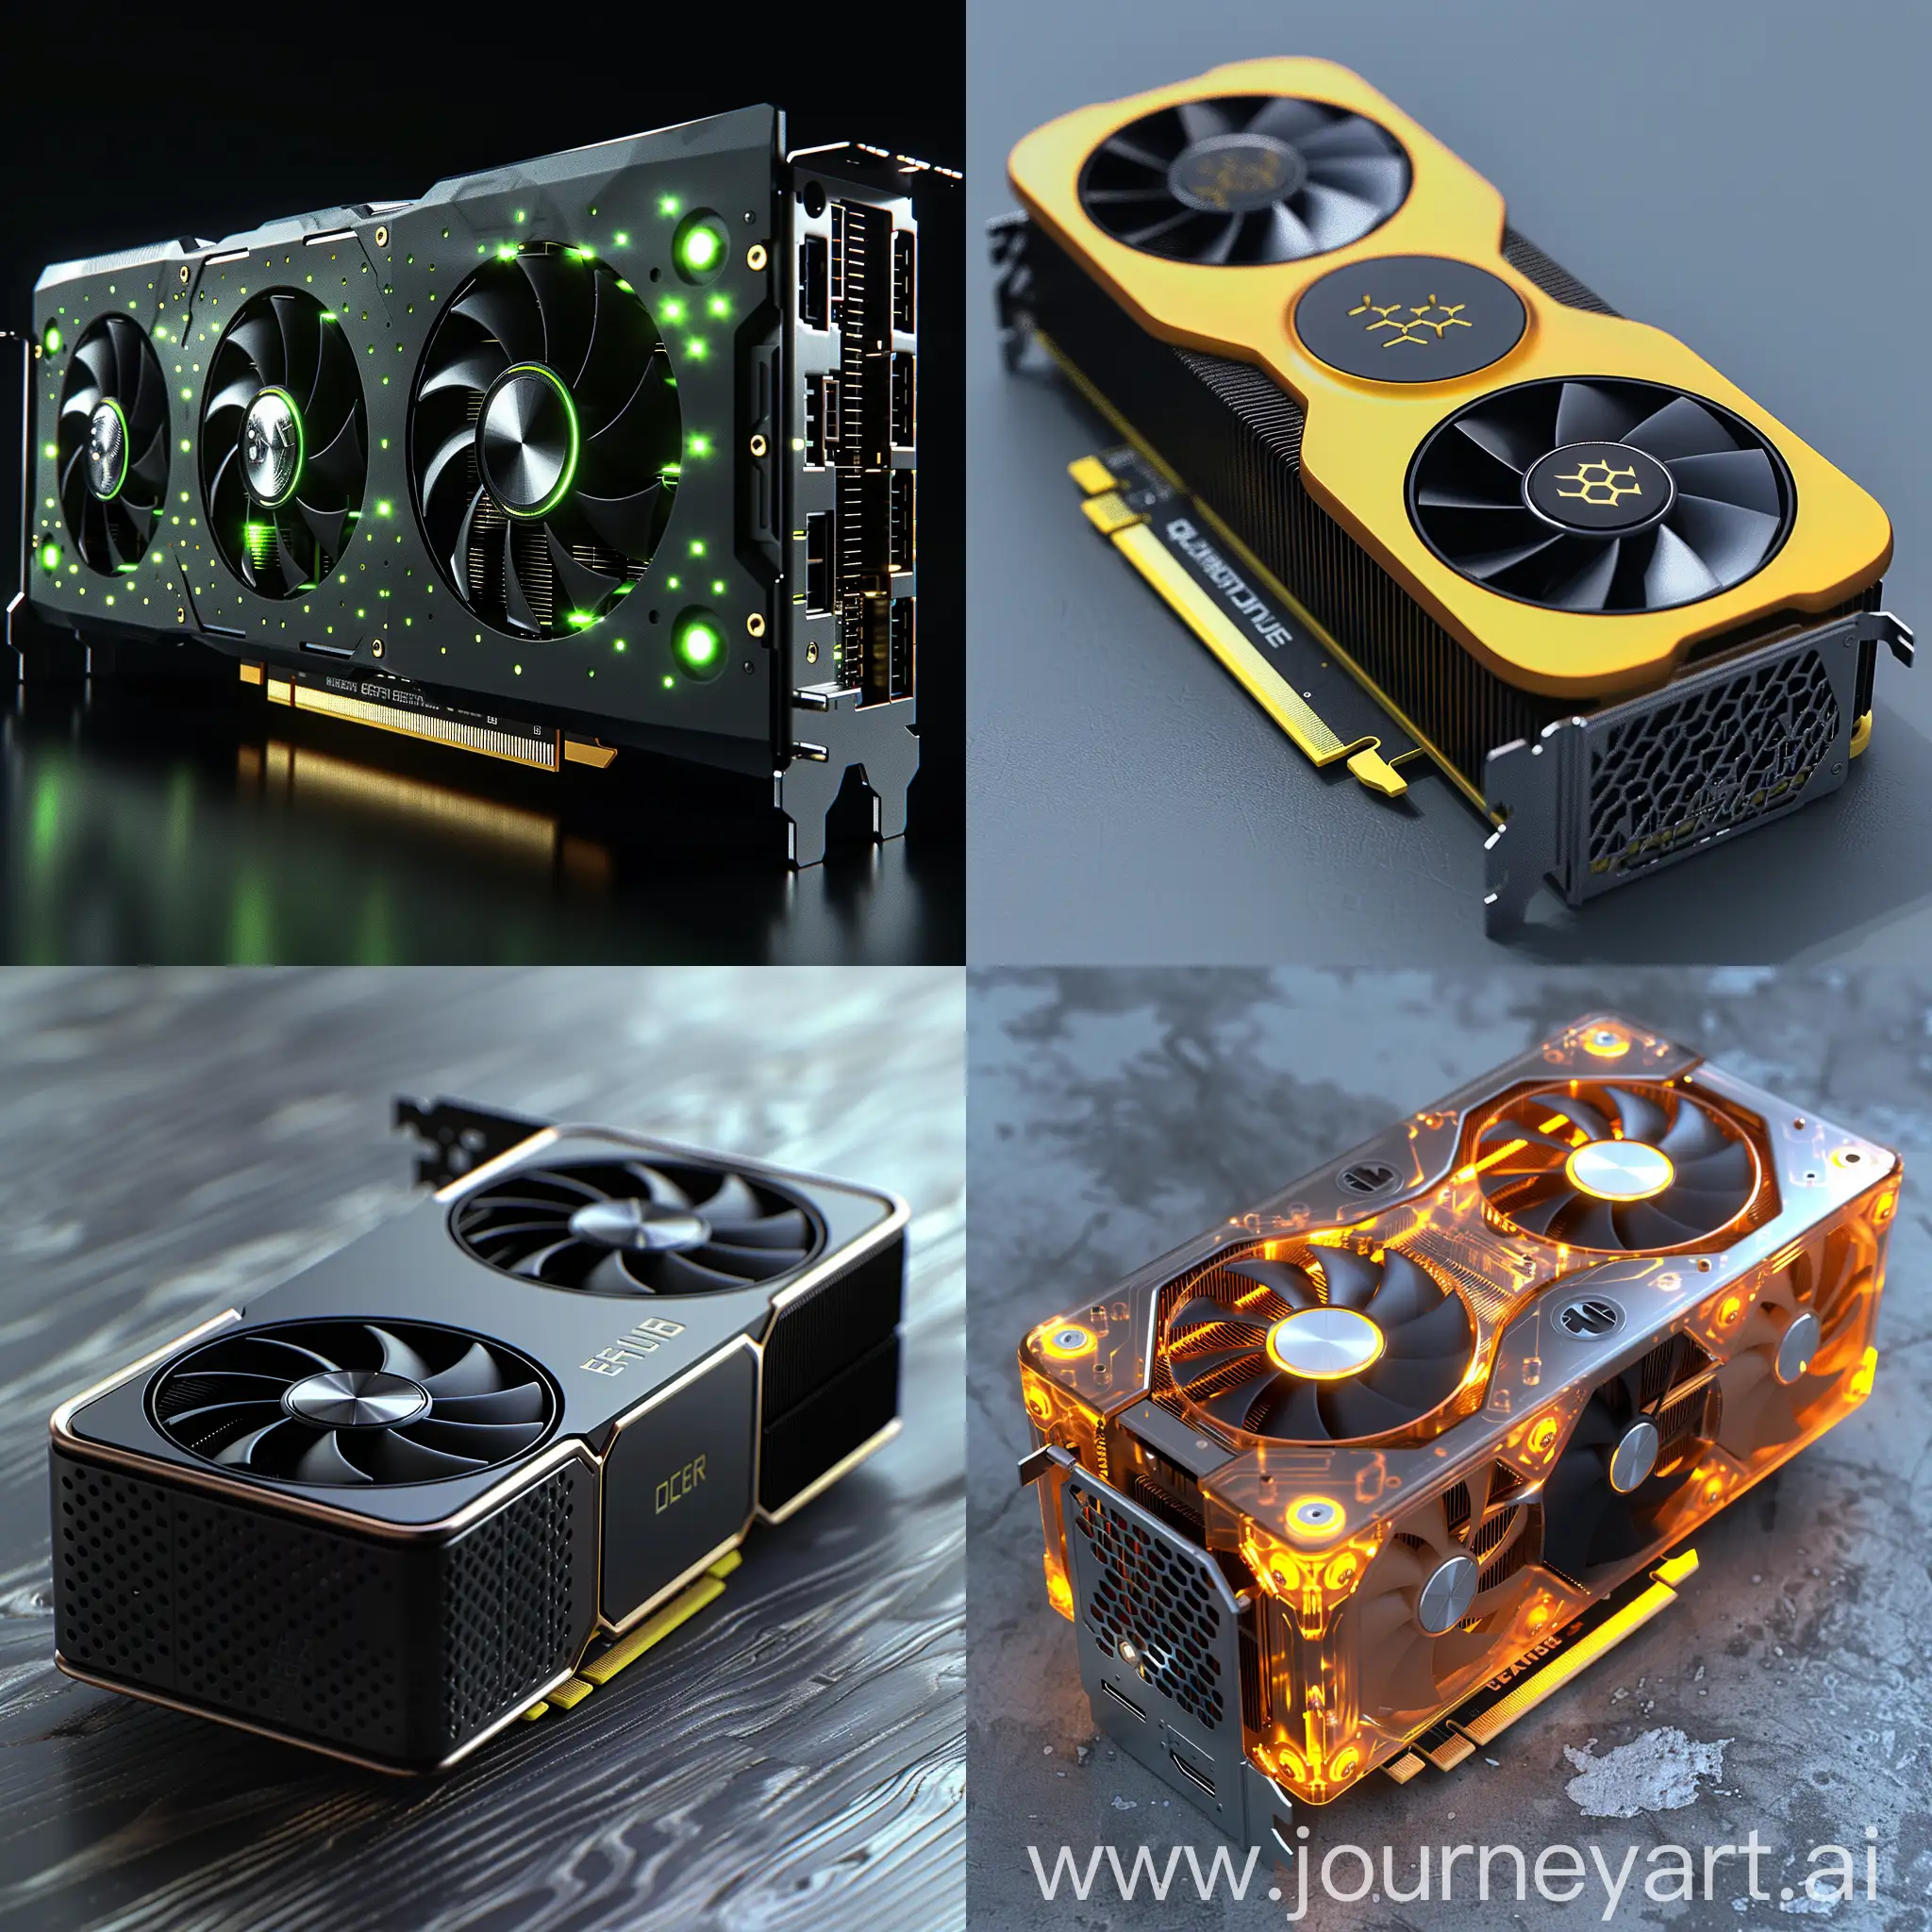 Futuristic-PC-Graphics-Card-with-Biodegradable-Materials-and-EnergyEfficient-Design